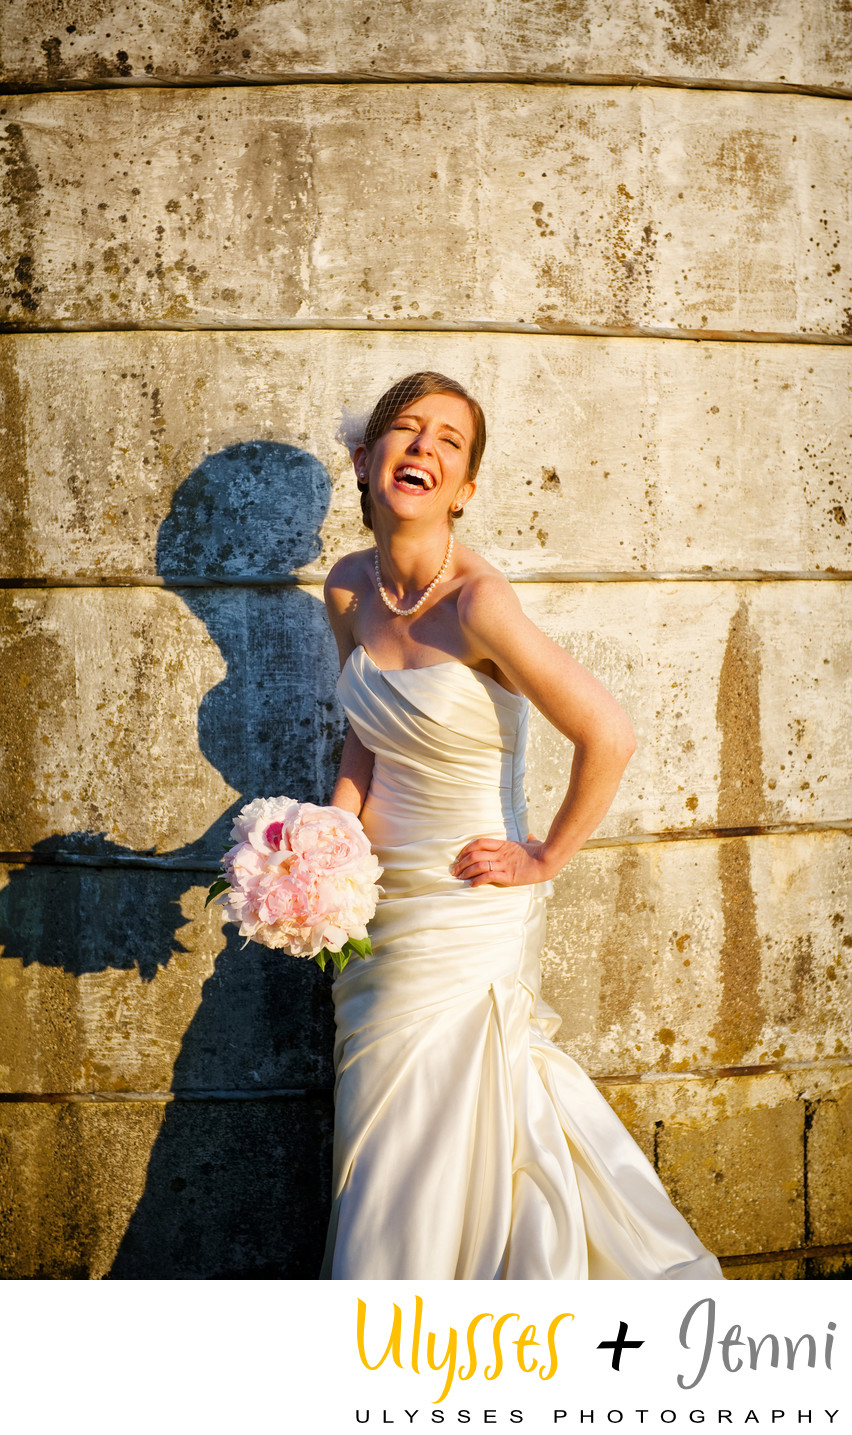 How to Get the Best Bridal Portraits